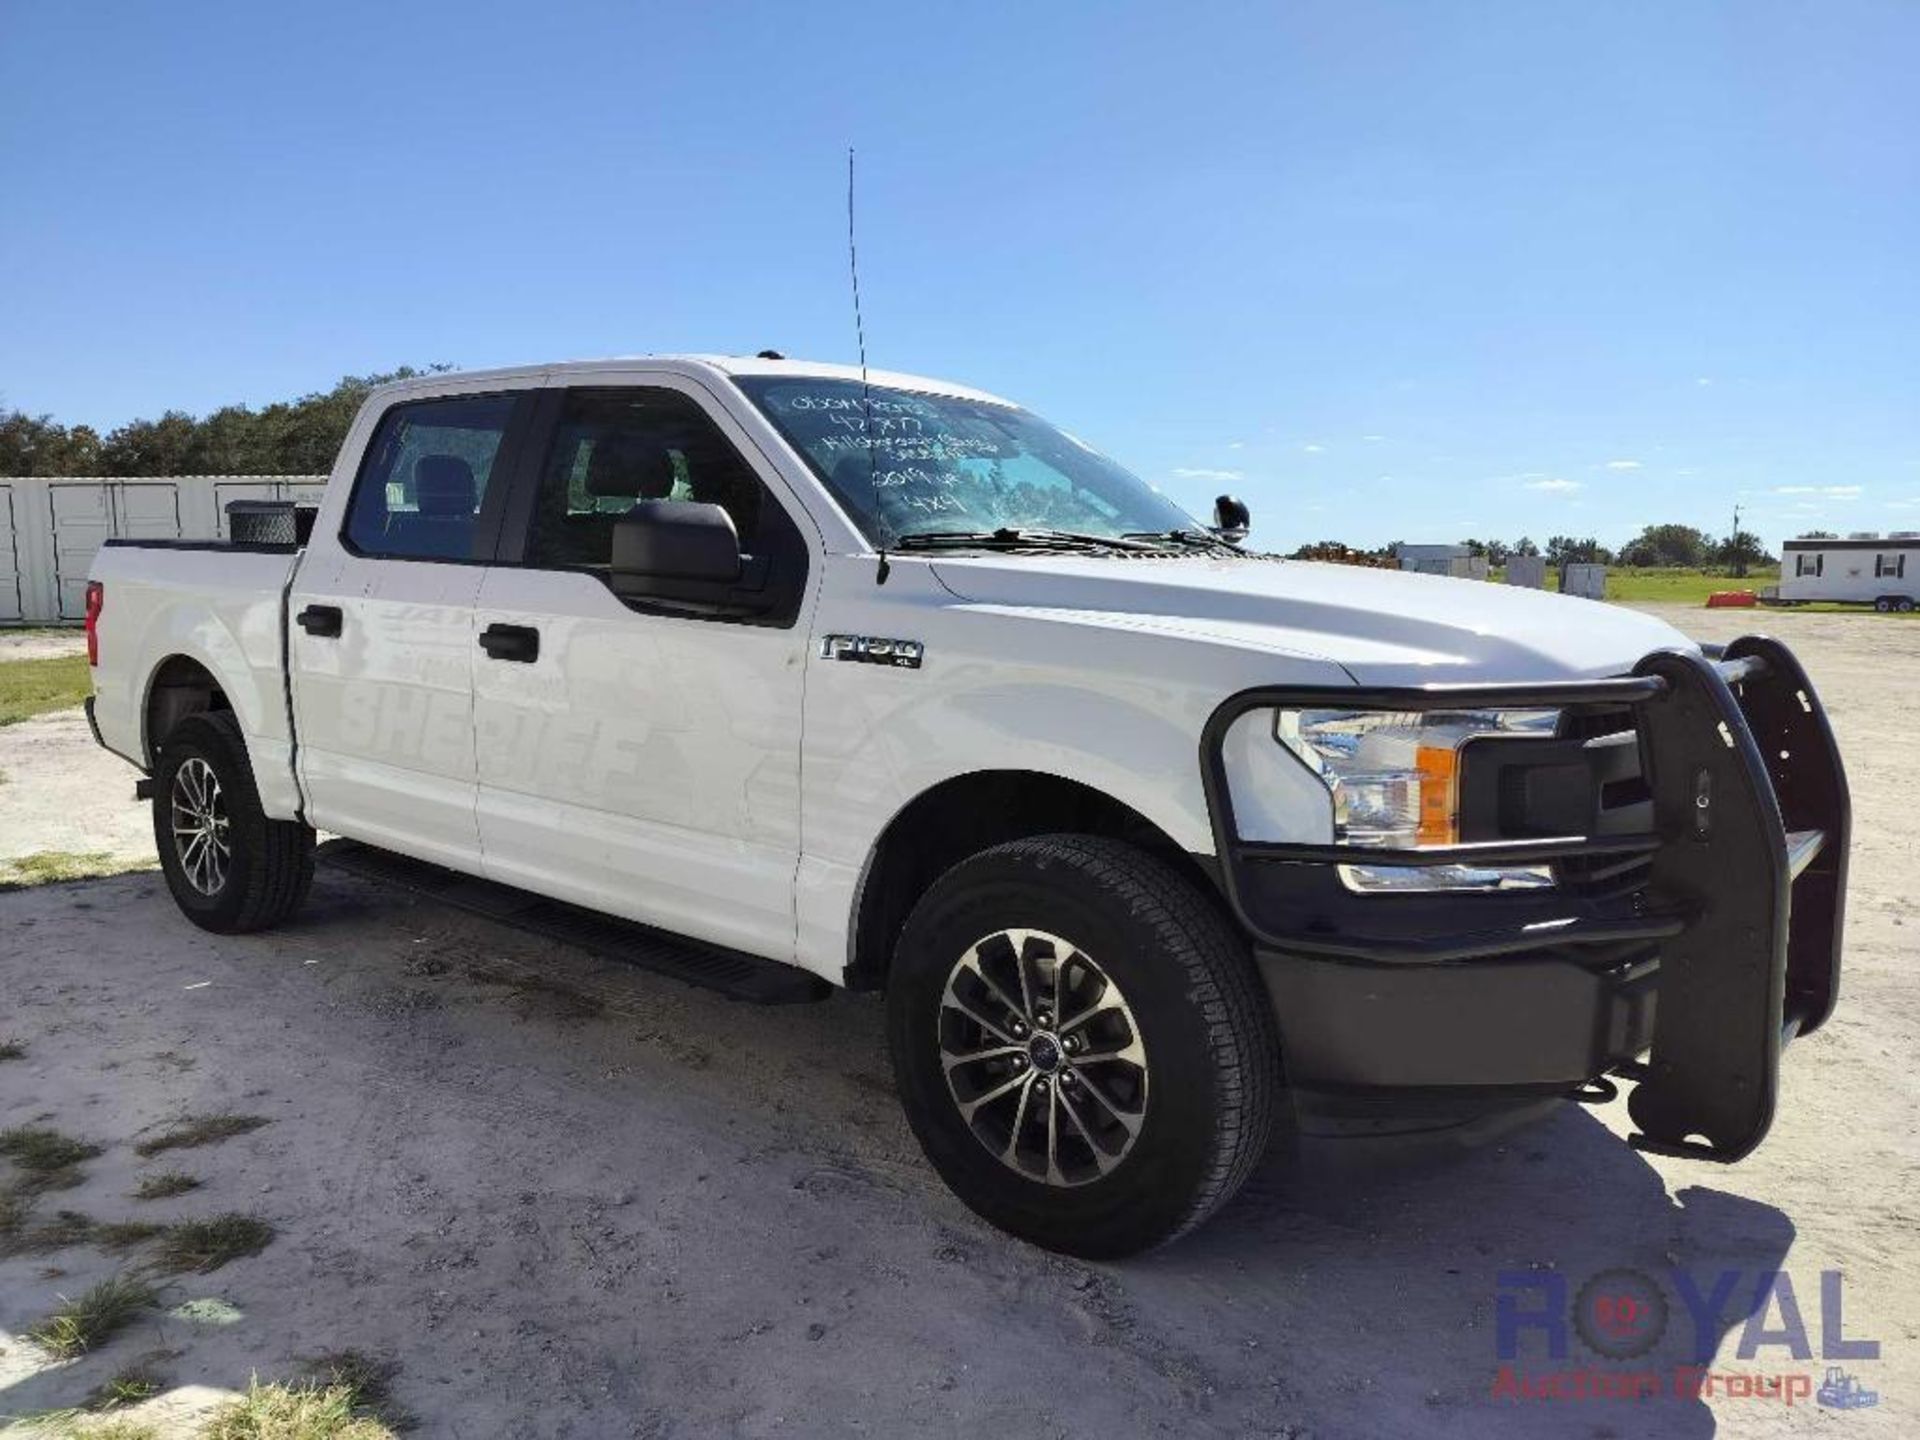 2019 Ford F150 4x4 Pickup Truck - Image 2 of 33